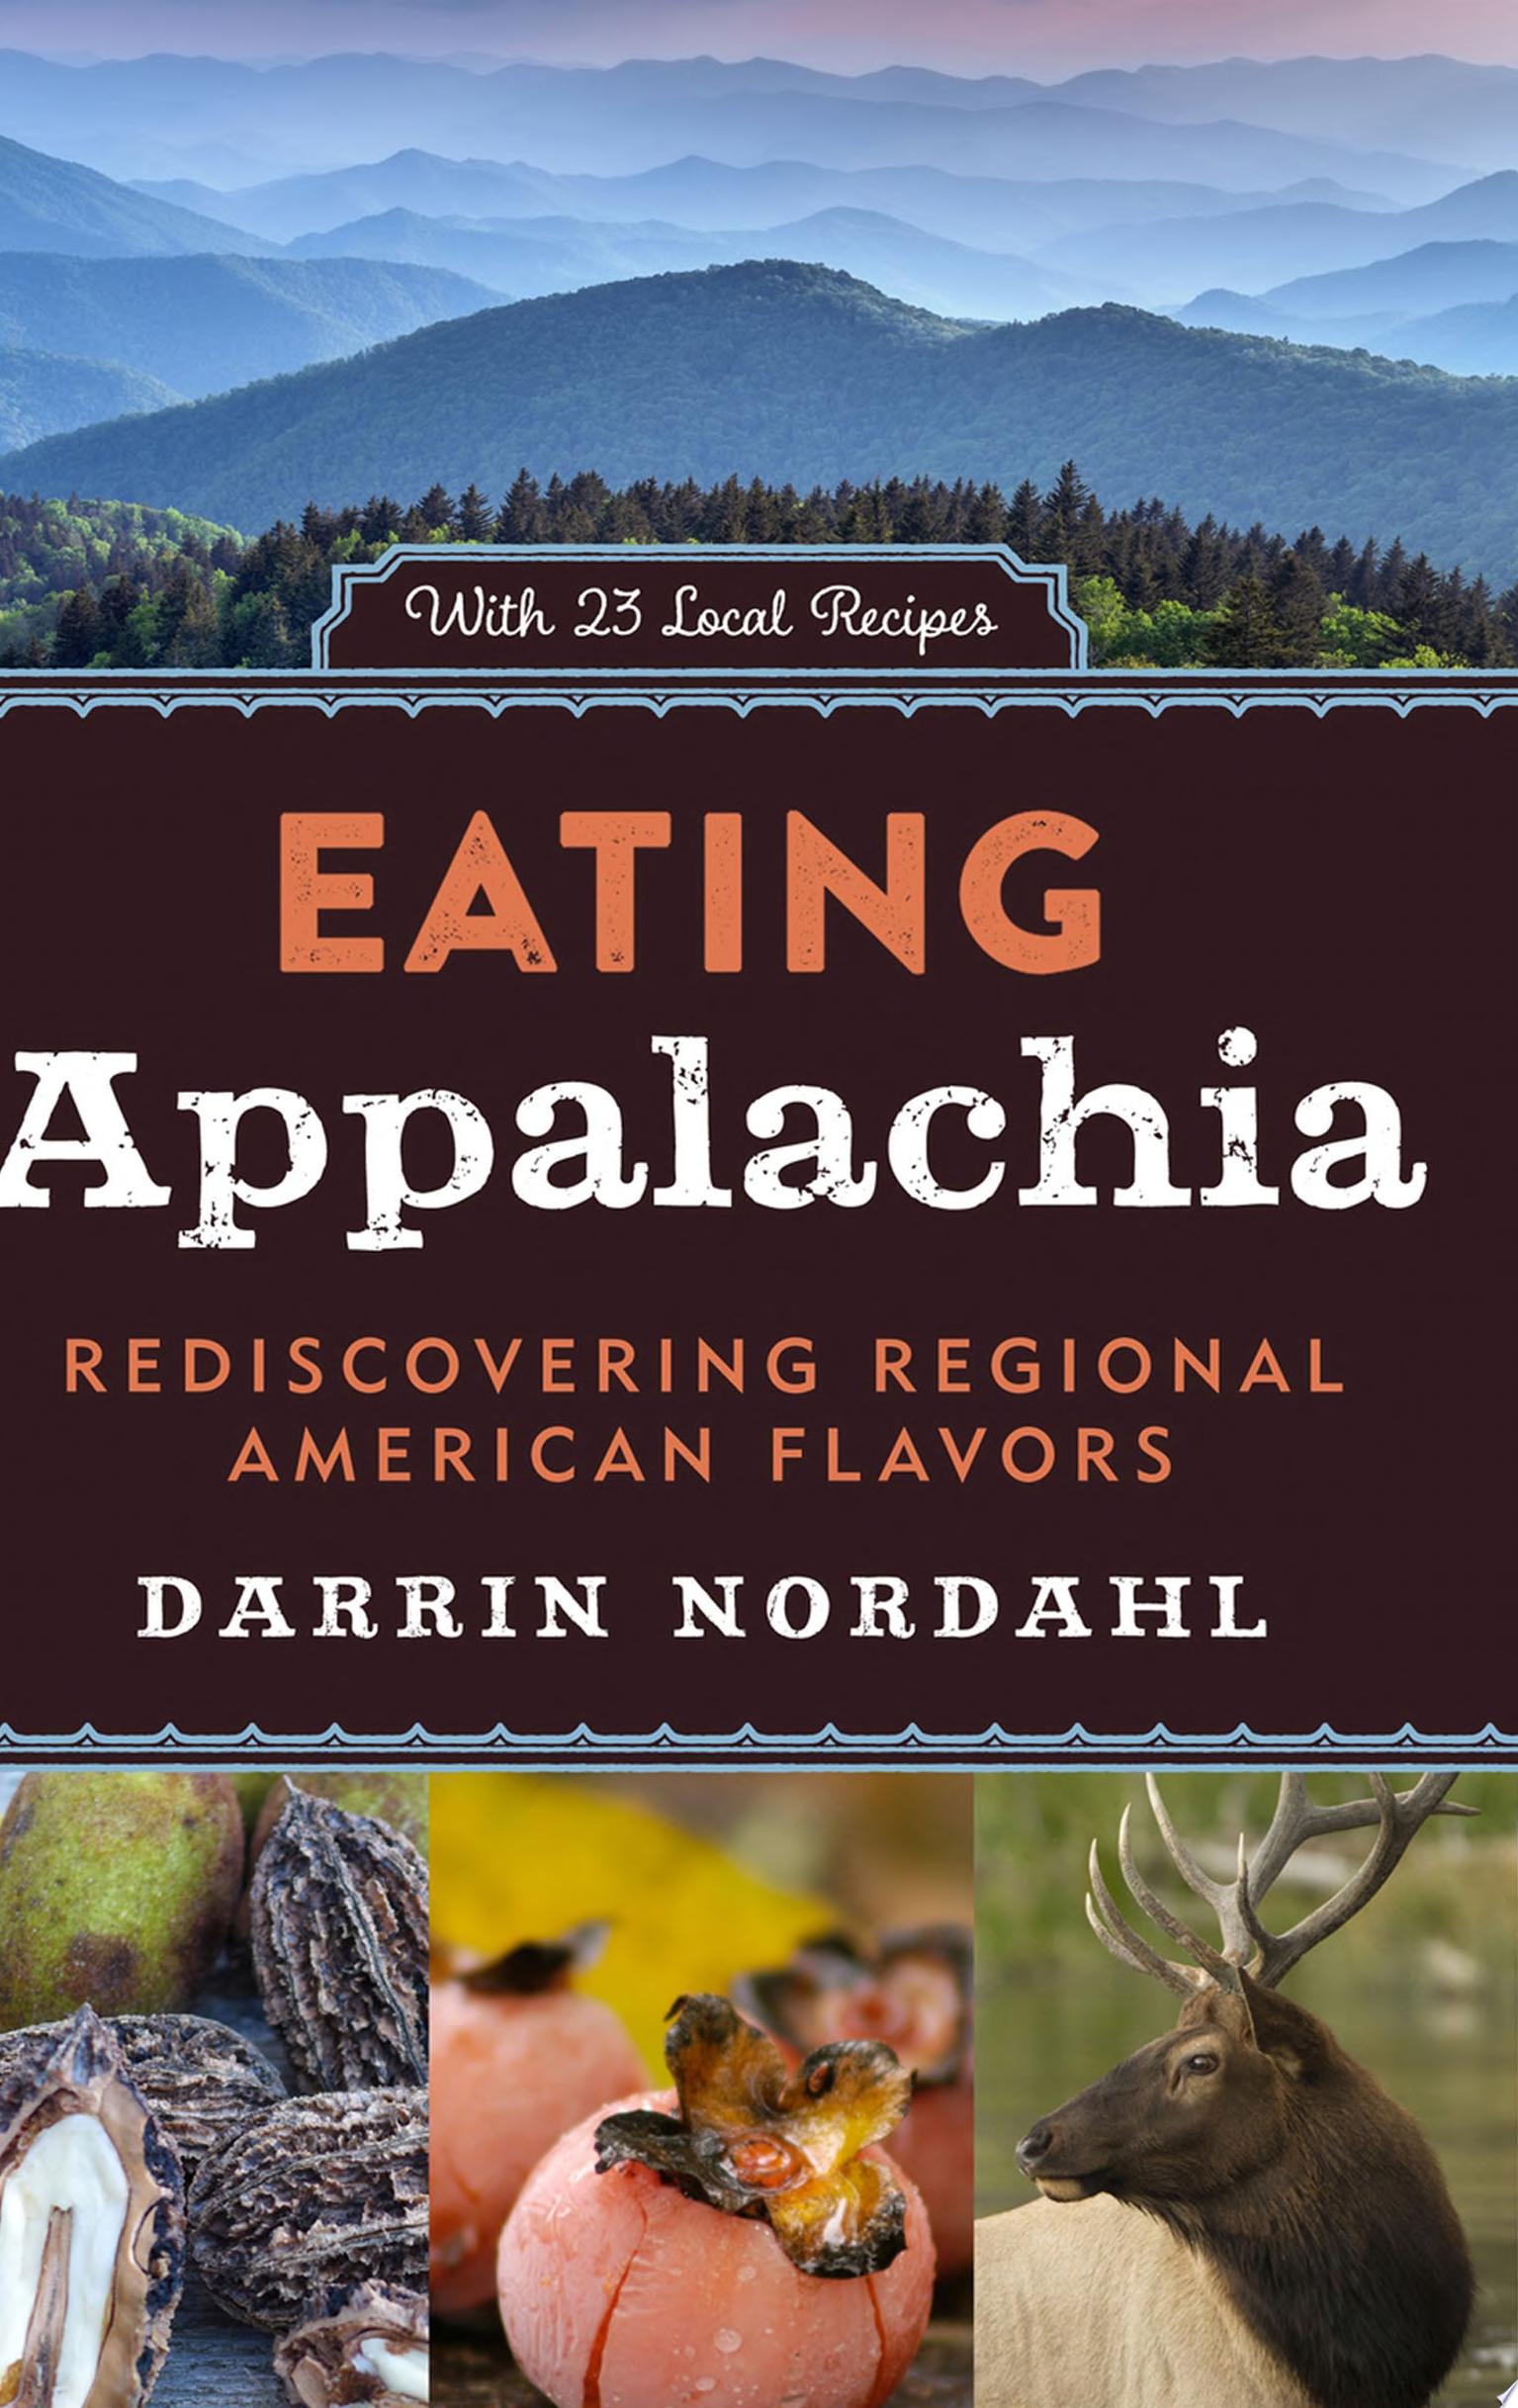 Image for "Eating Appalachia"